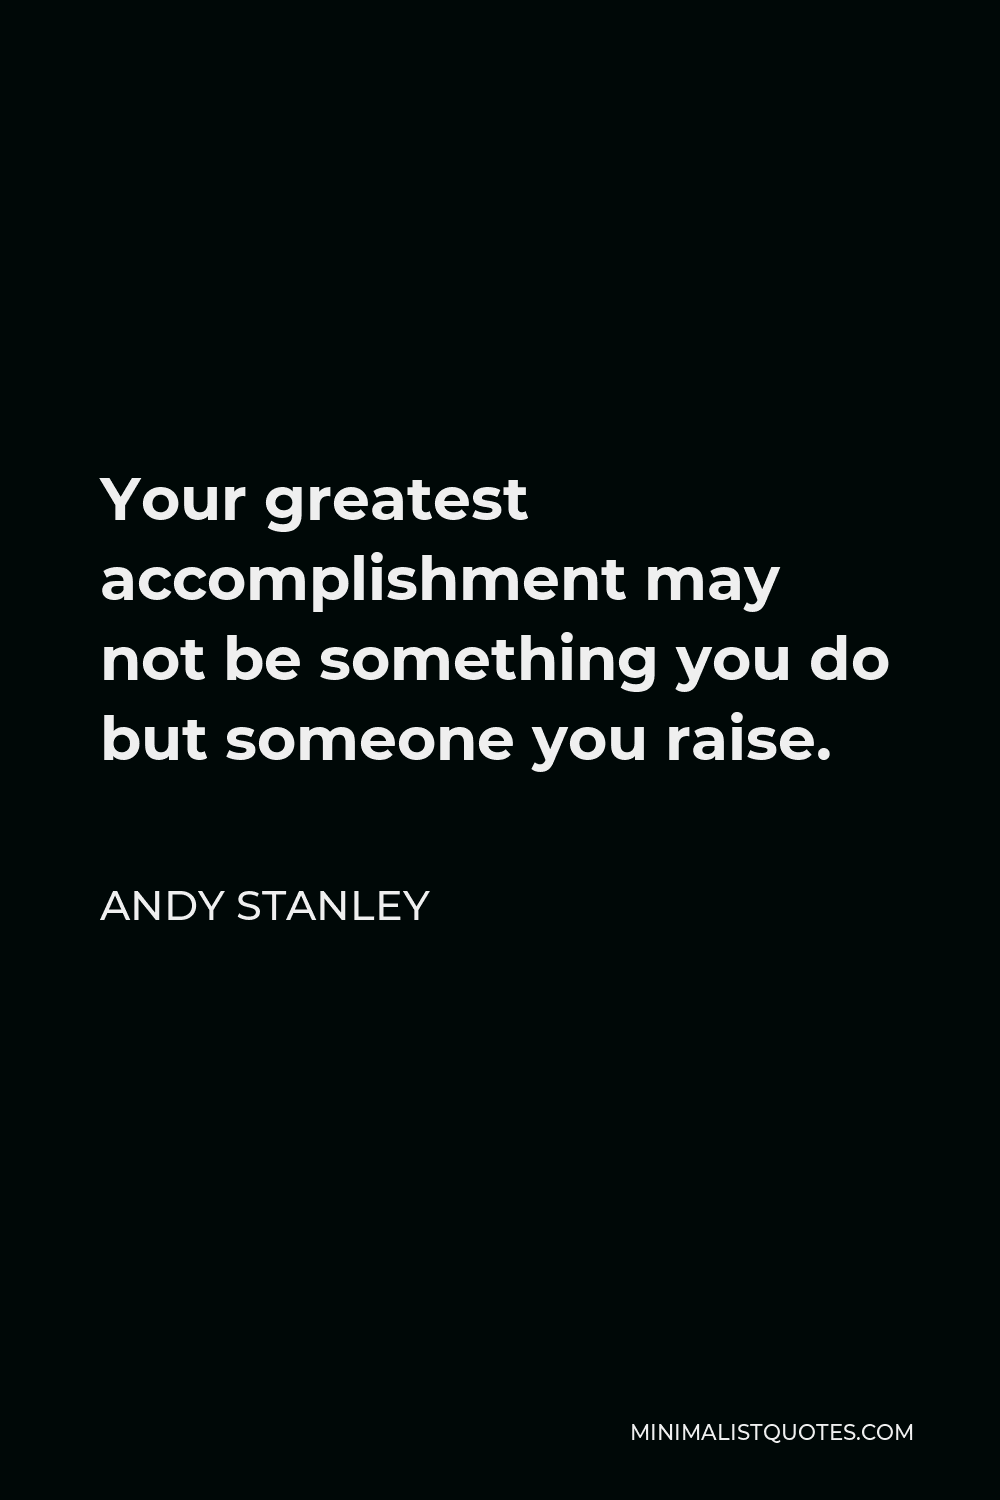 Andy Stanley Quote - Your greatest accomplishment may not be something you do but someone you raise.